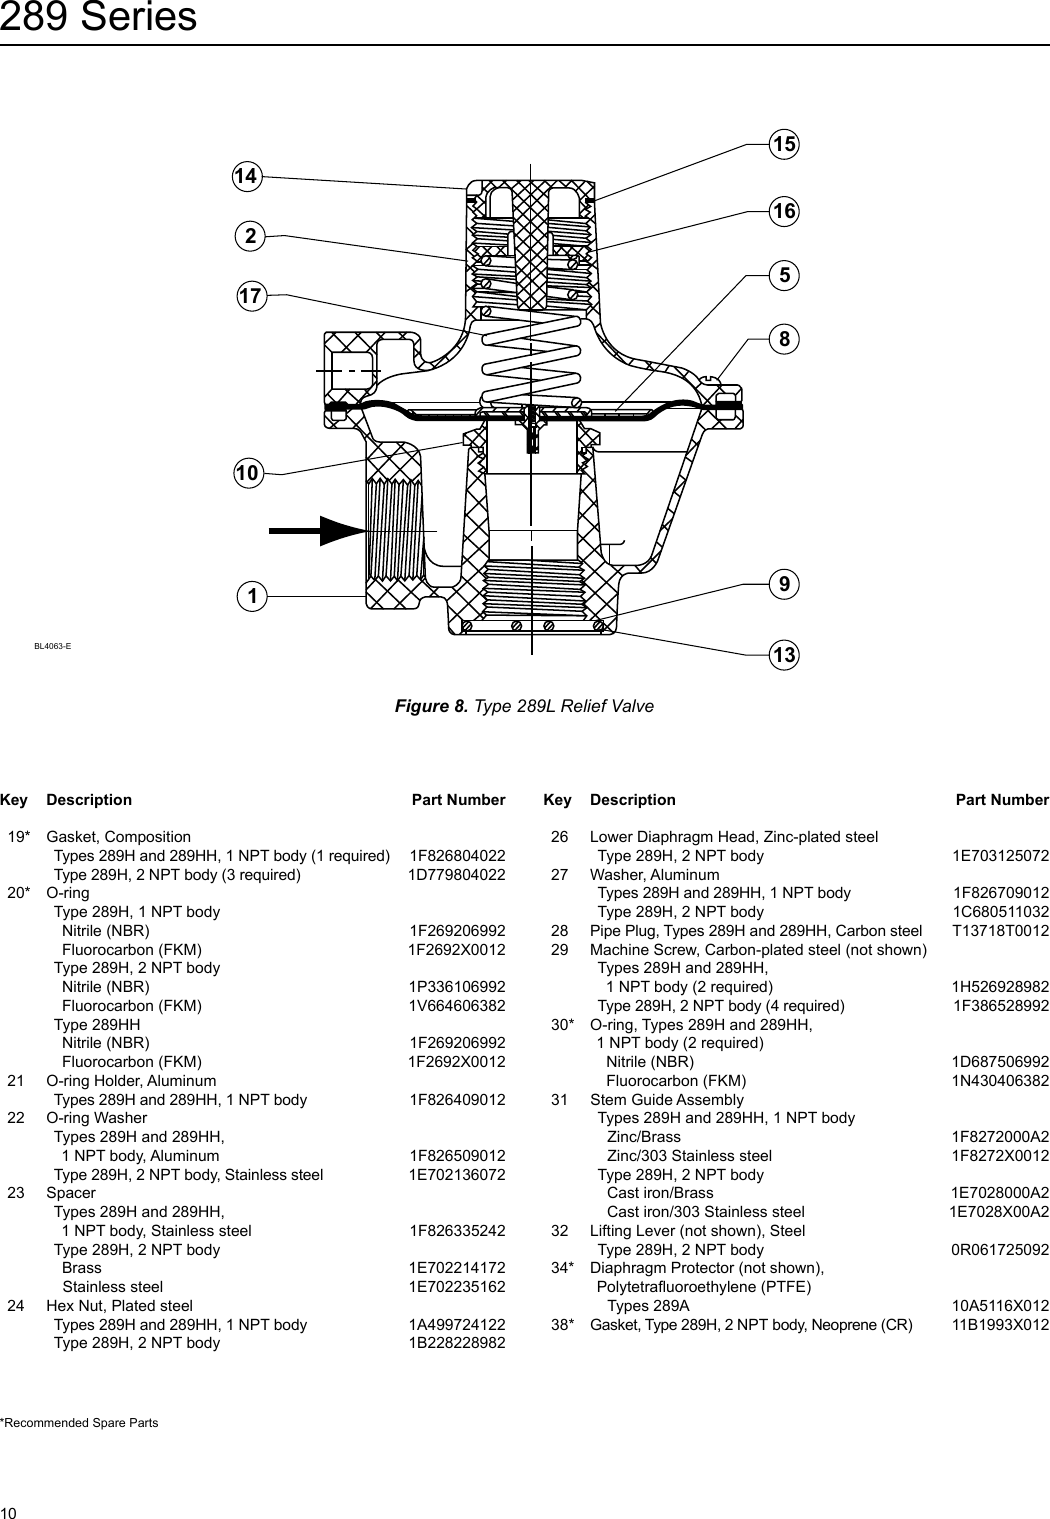 Page 10 of 12 - Emerson Emerson-289-Series-Relief-Valves-Backpressure-Regulators-Instruction-Manual-  Emerson-289-series-relief-valves-backpressure-regulators-instruction-manual